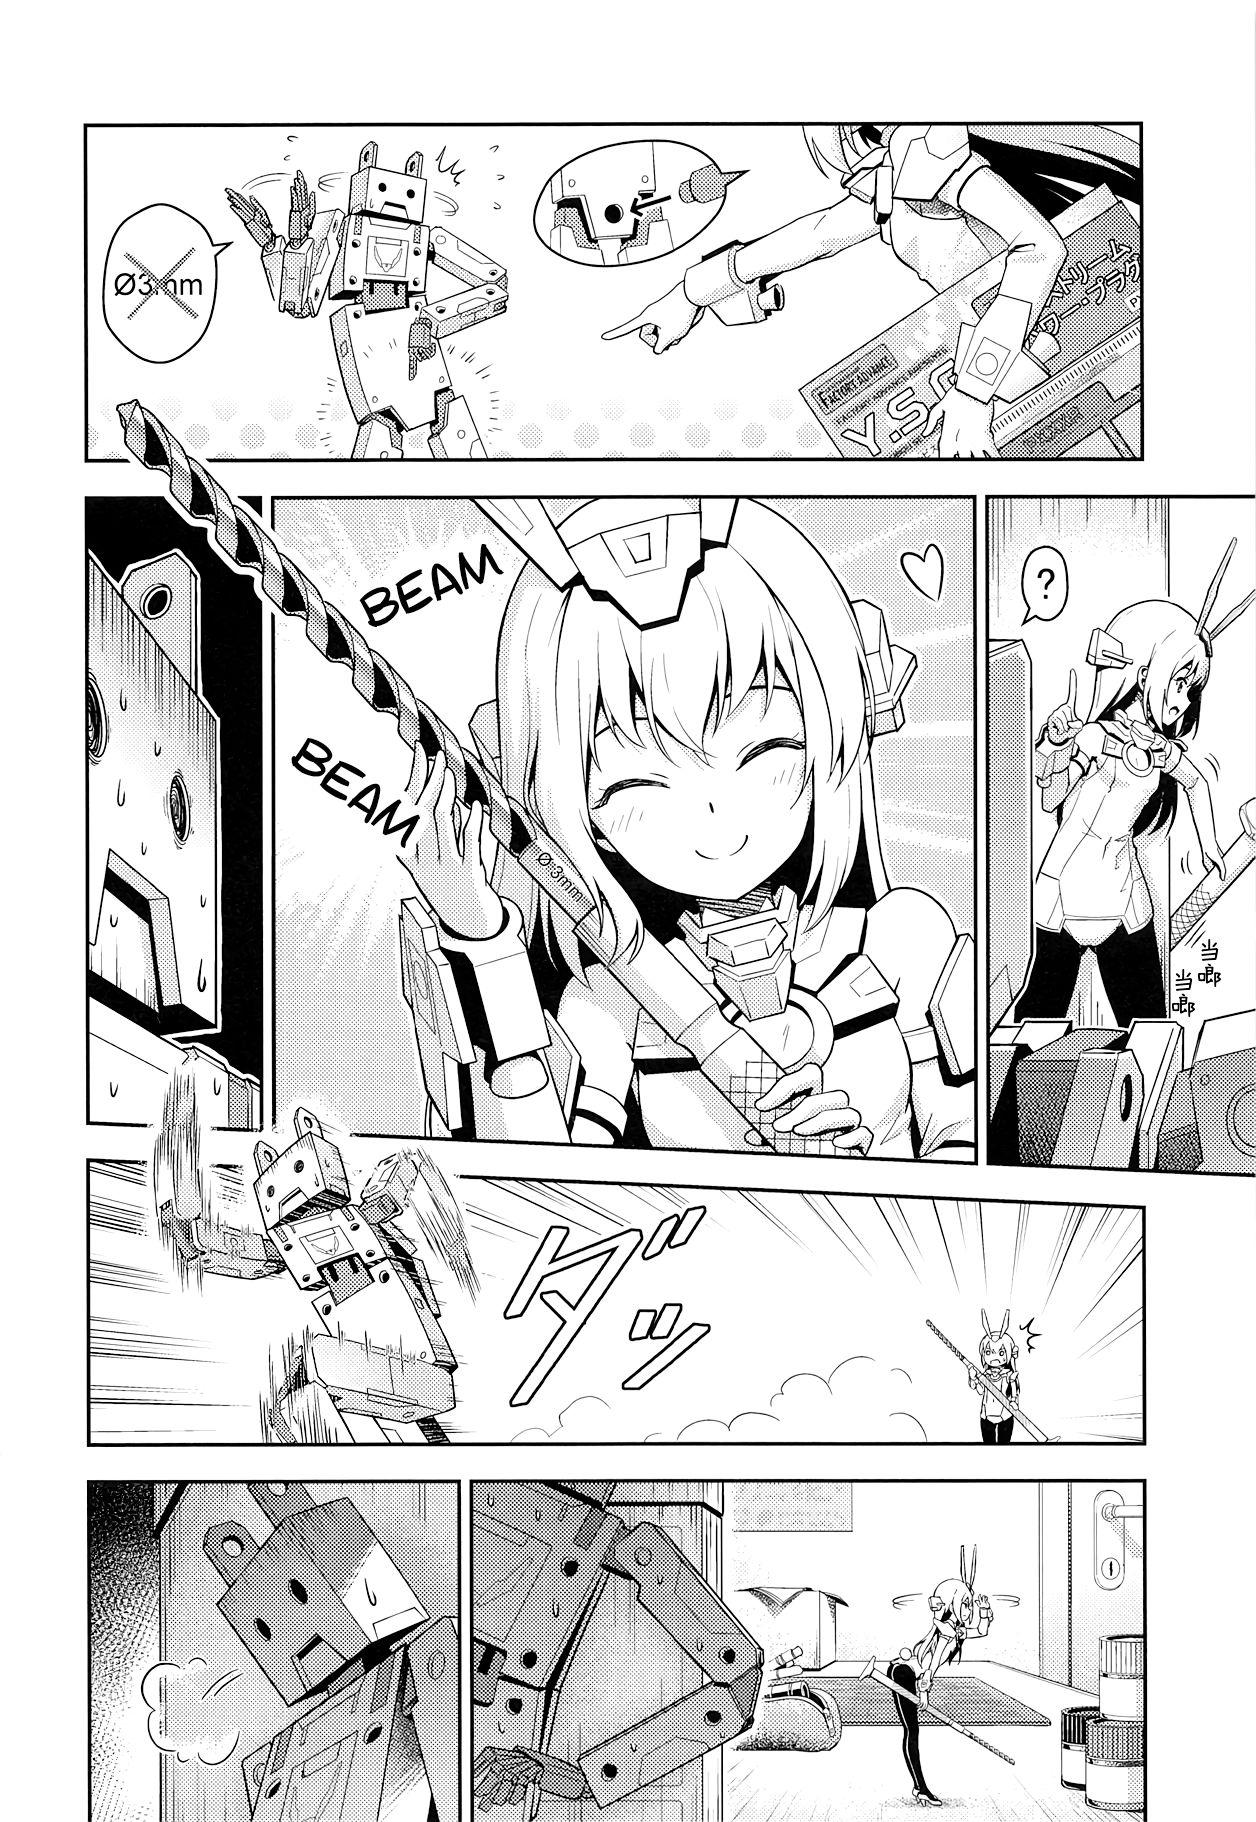 Lesbian Porn Base, Juuden Shitai! - Frame arms girl Sologirl - Page 5